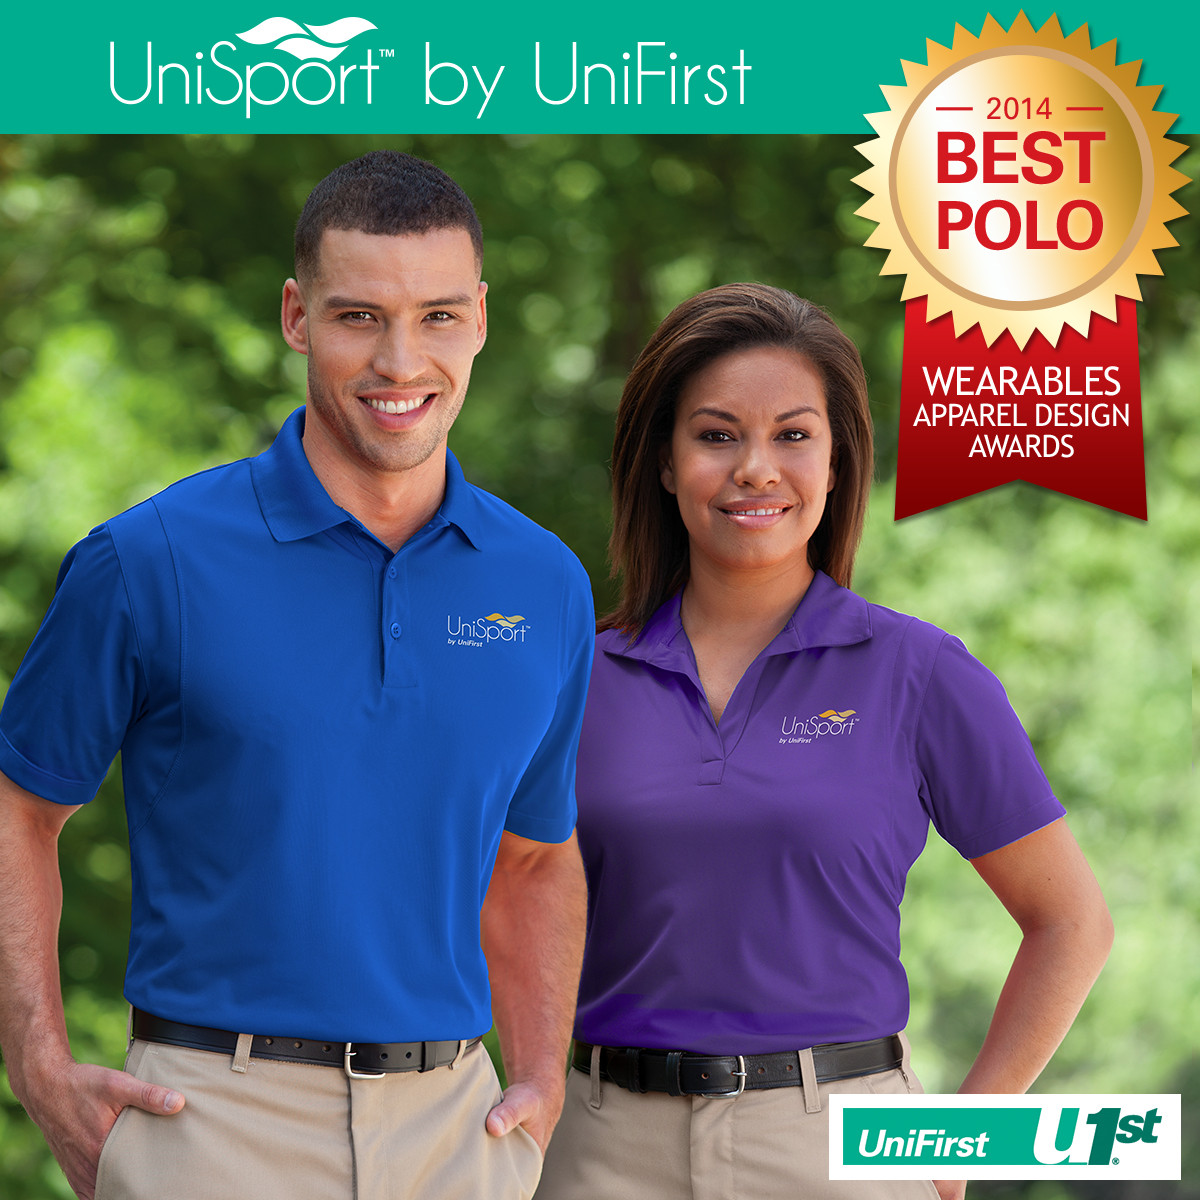 UniFirst's New UniSport Polo